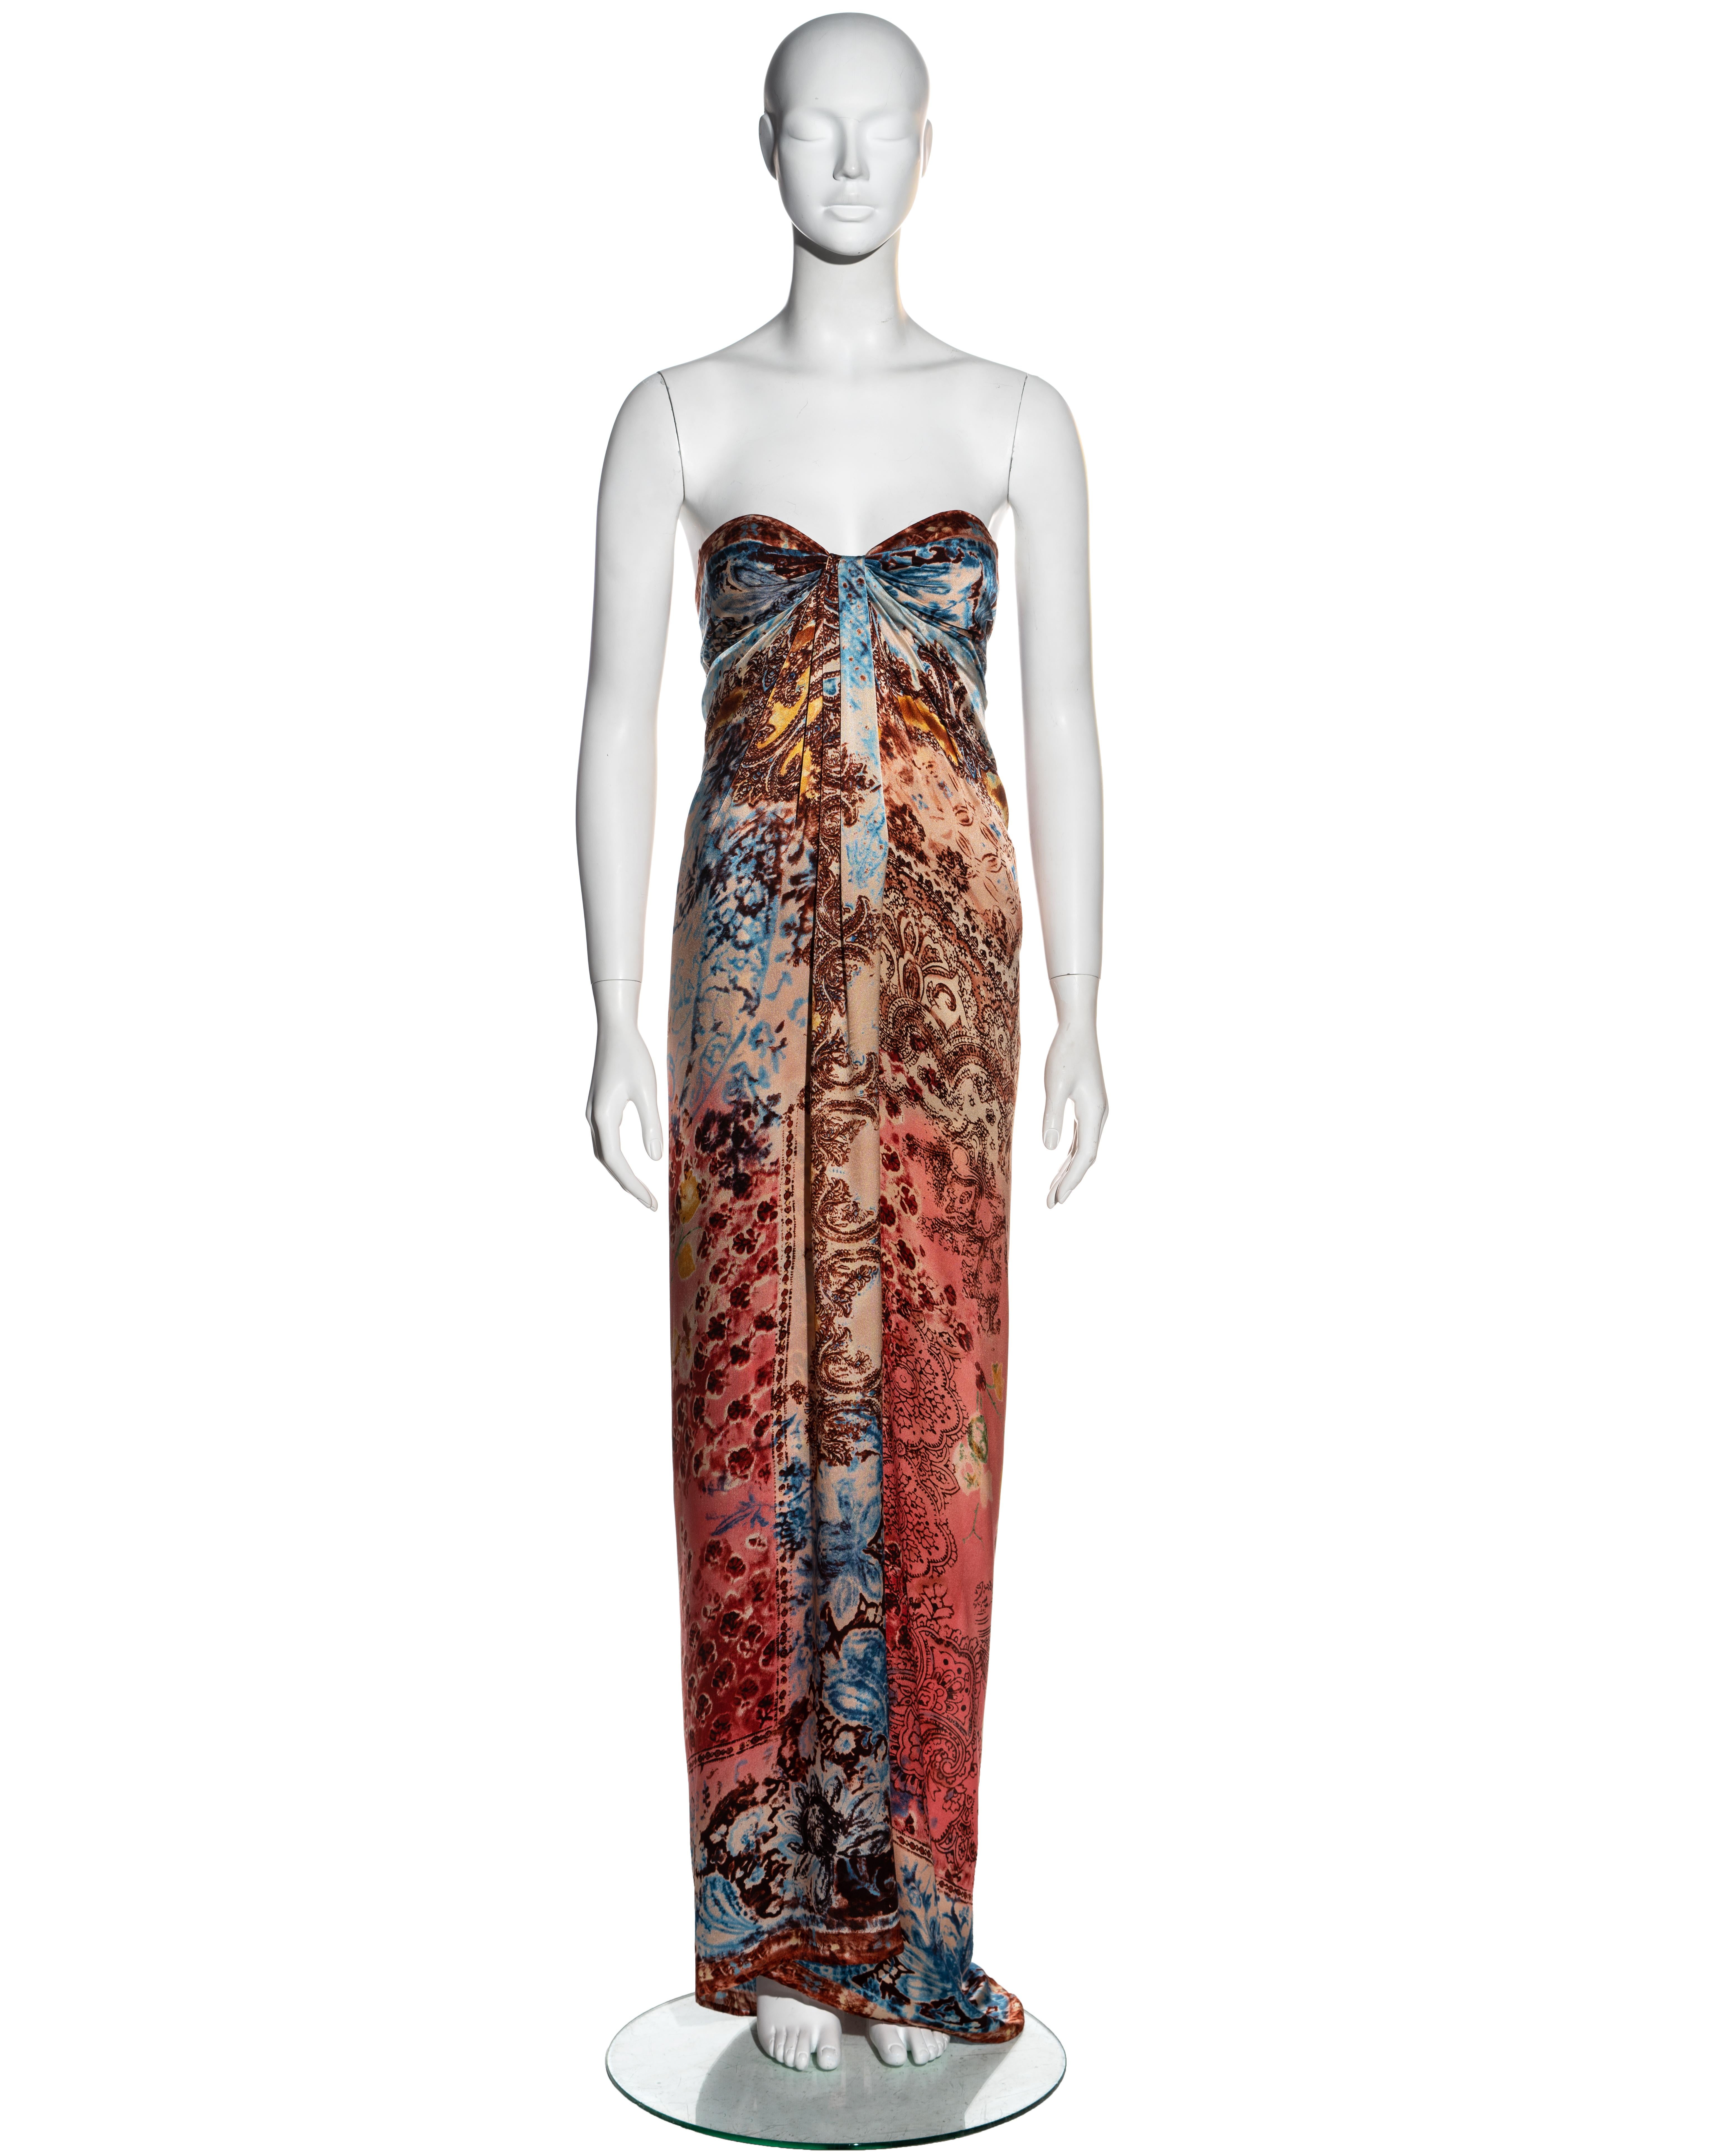 ▪ Emanuel Ungaro multicoloured printed silk strapless evening dress 
▪ Sarong inspired skirt wraps around the body and clips into the bust 
▪ Mini underdress with built-in corset
▪ Pleating on bust 
▪ Zipper at centre-back 
▪ Size approx. XS / S
▪